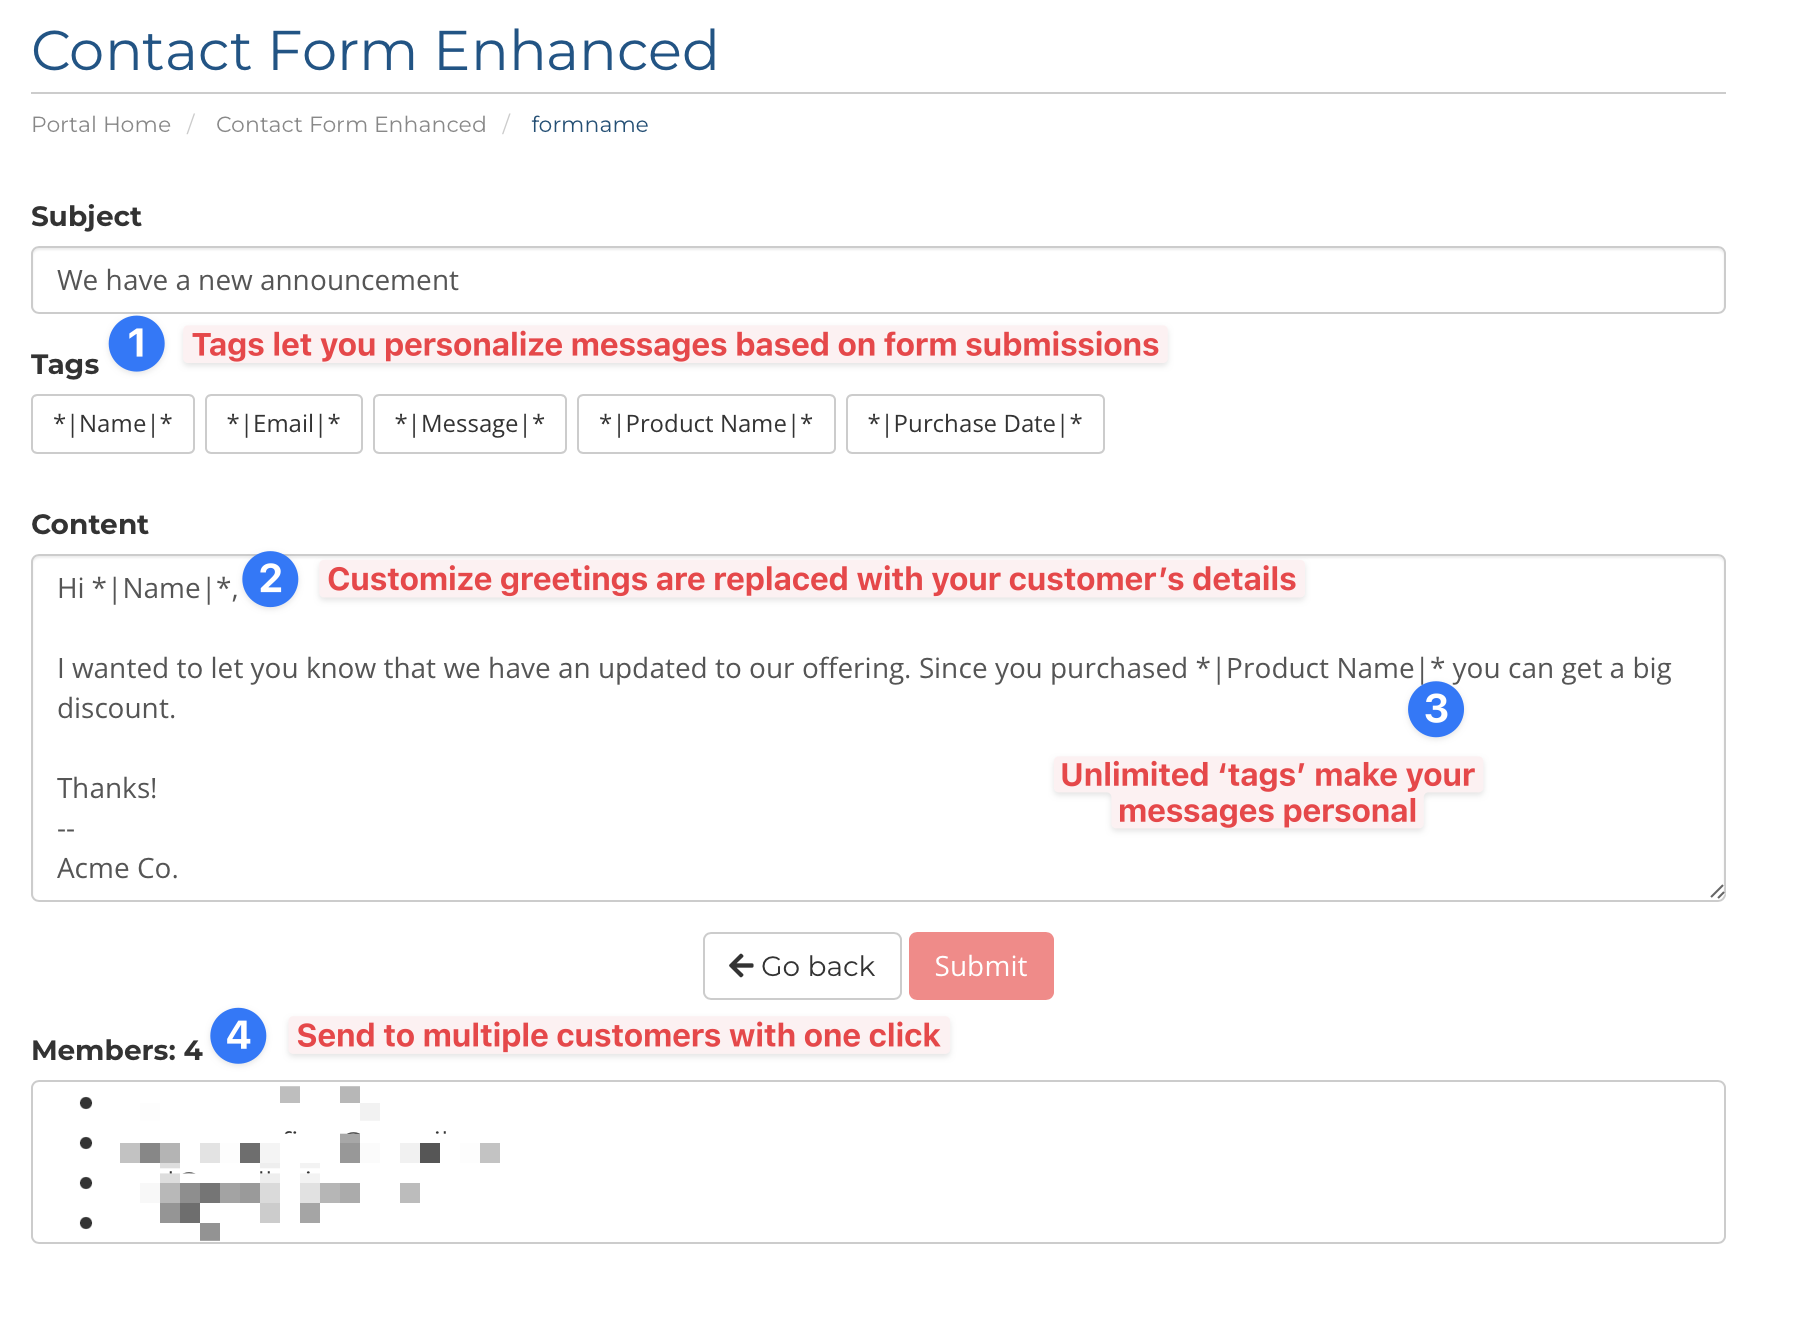 Mass Emails with Contact Forms Enhanced